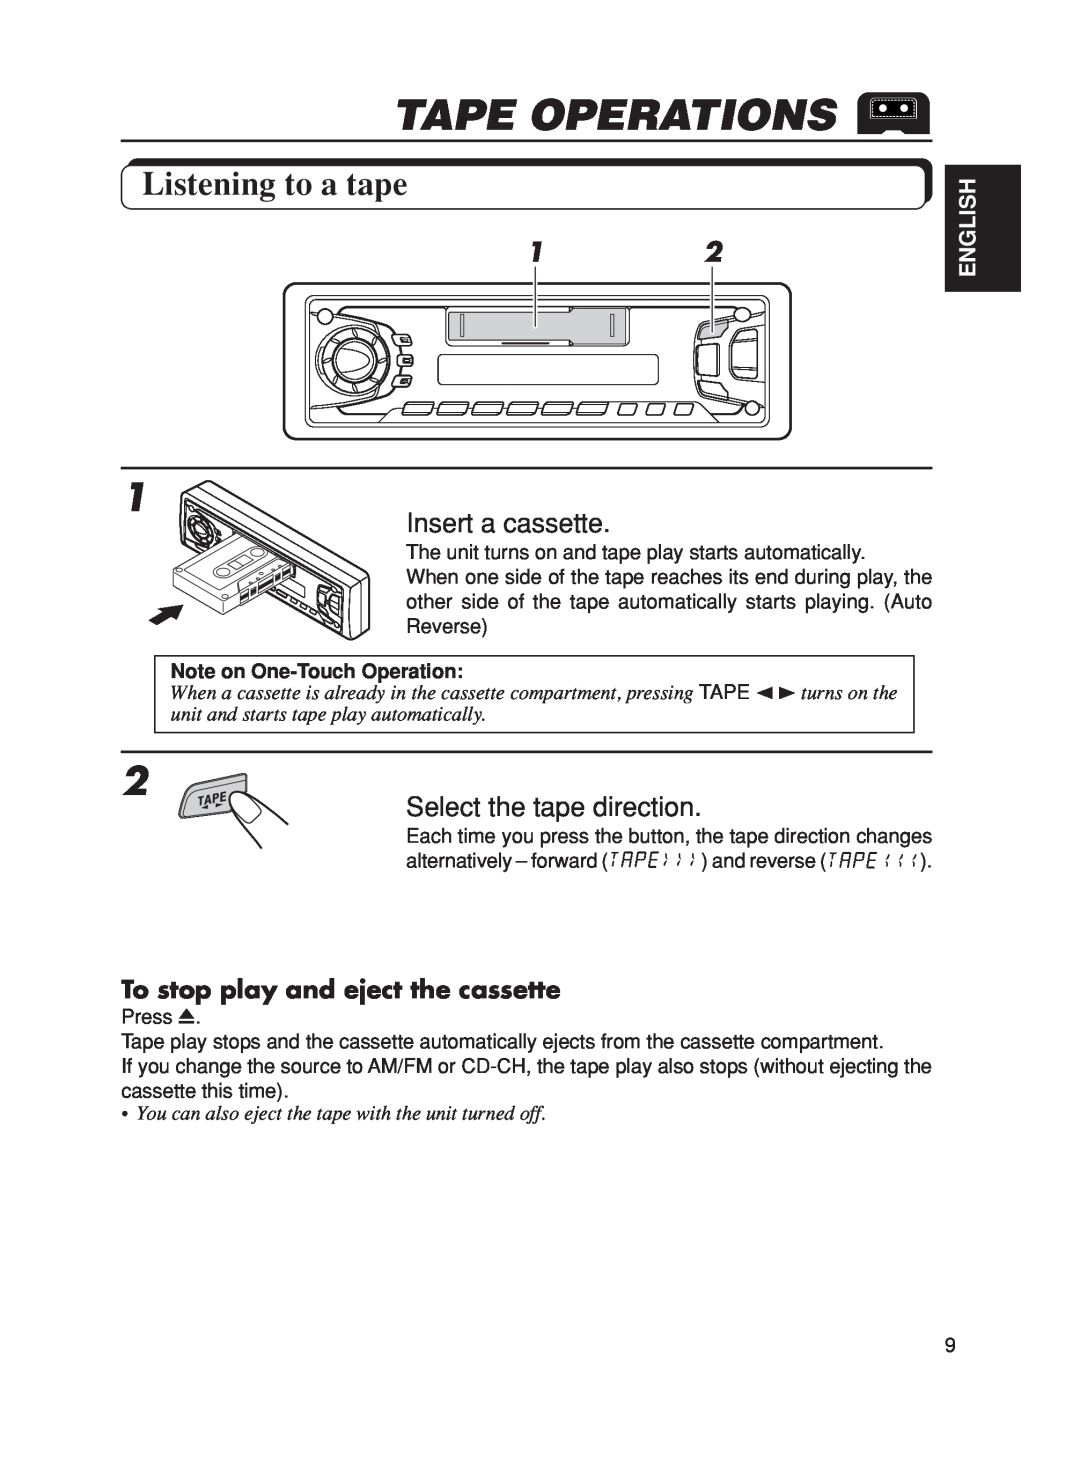 JVC KS-FX270 manual Tape Operations, Listening to a tape, Insert a cassette, Select the tape direction, English 